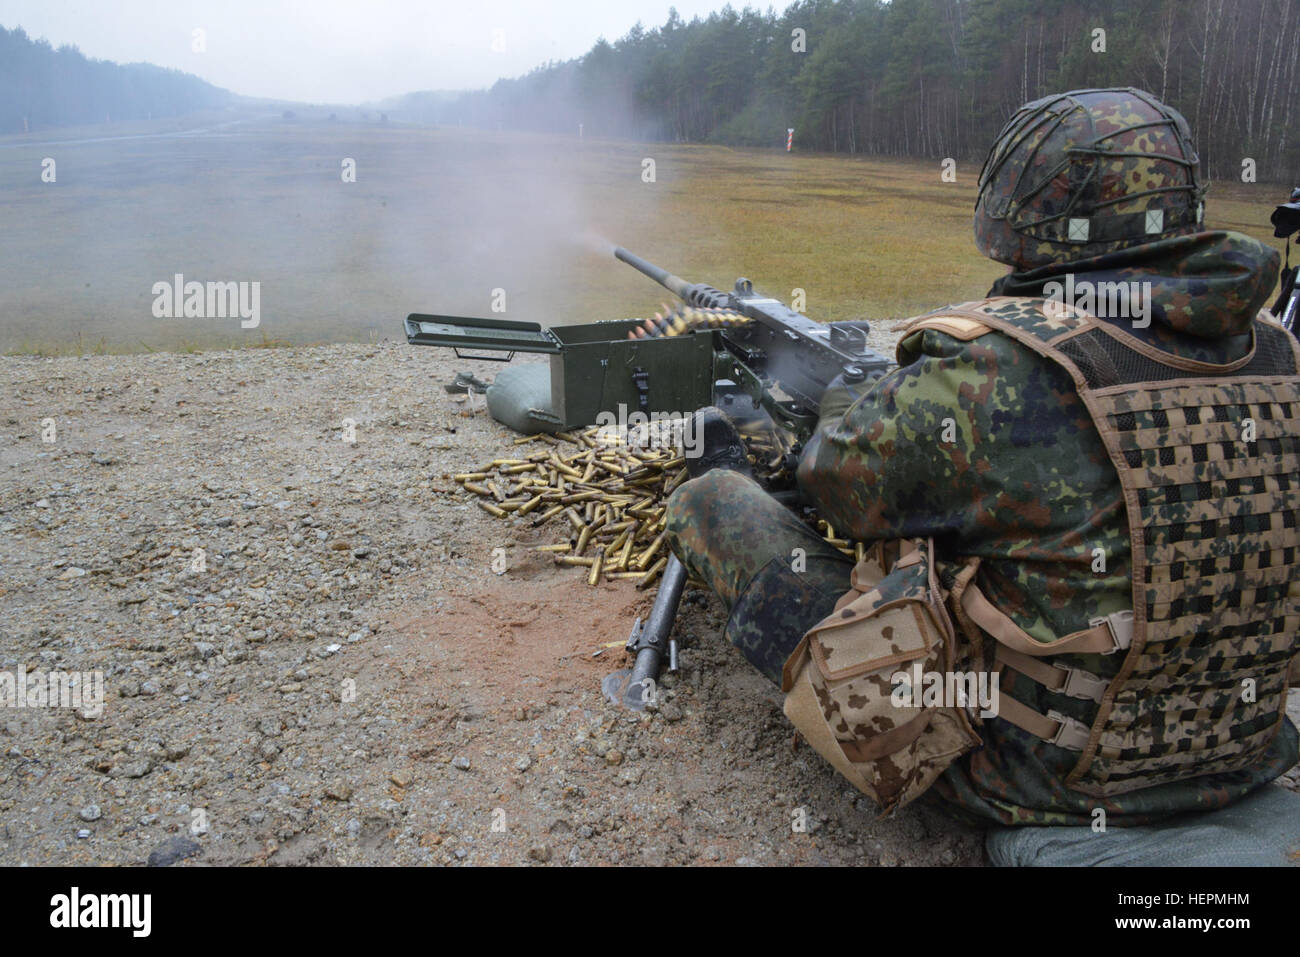 A German soldier fires a .50-caliber machine gun during a familiarization training on U.S. weapons at the 7th Army Joint Multinational Training Command Grafenwoehr Training Area, Germany, Dec. 9, 2015. (U.S. Army photo by Visual Information Specialist Gertrud Zach/released) CATC trains German soldiers on US weapons 151209-A-HE539-0139 Stock Photo